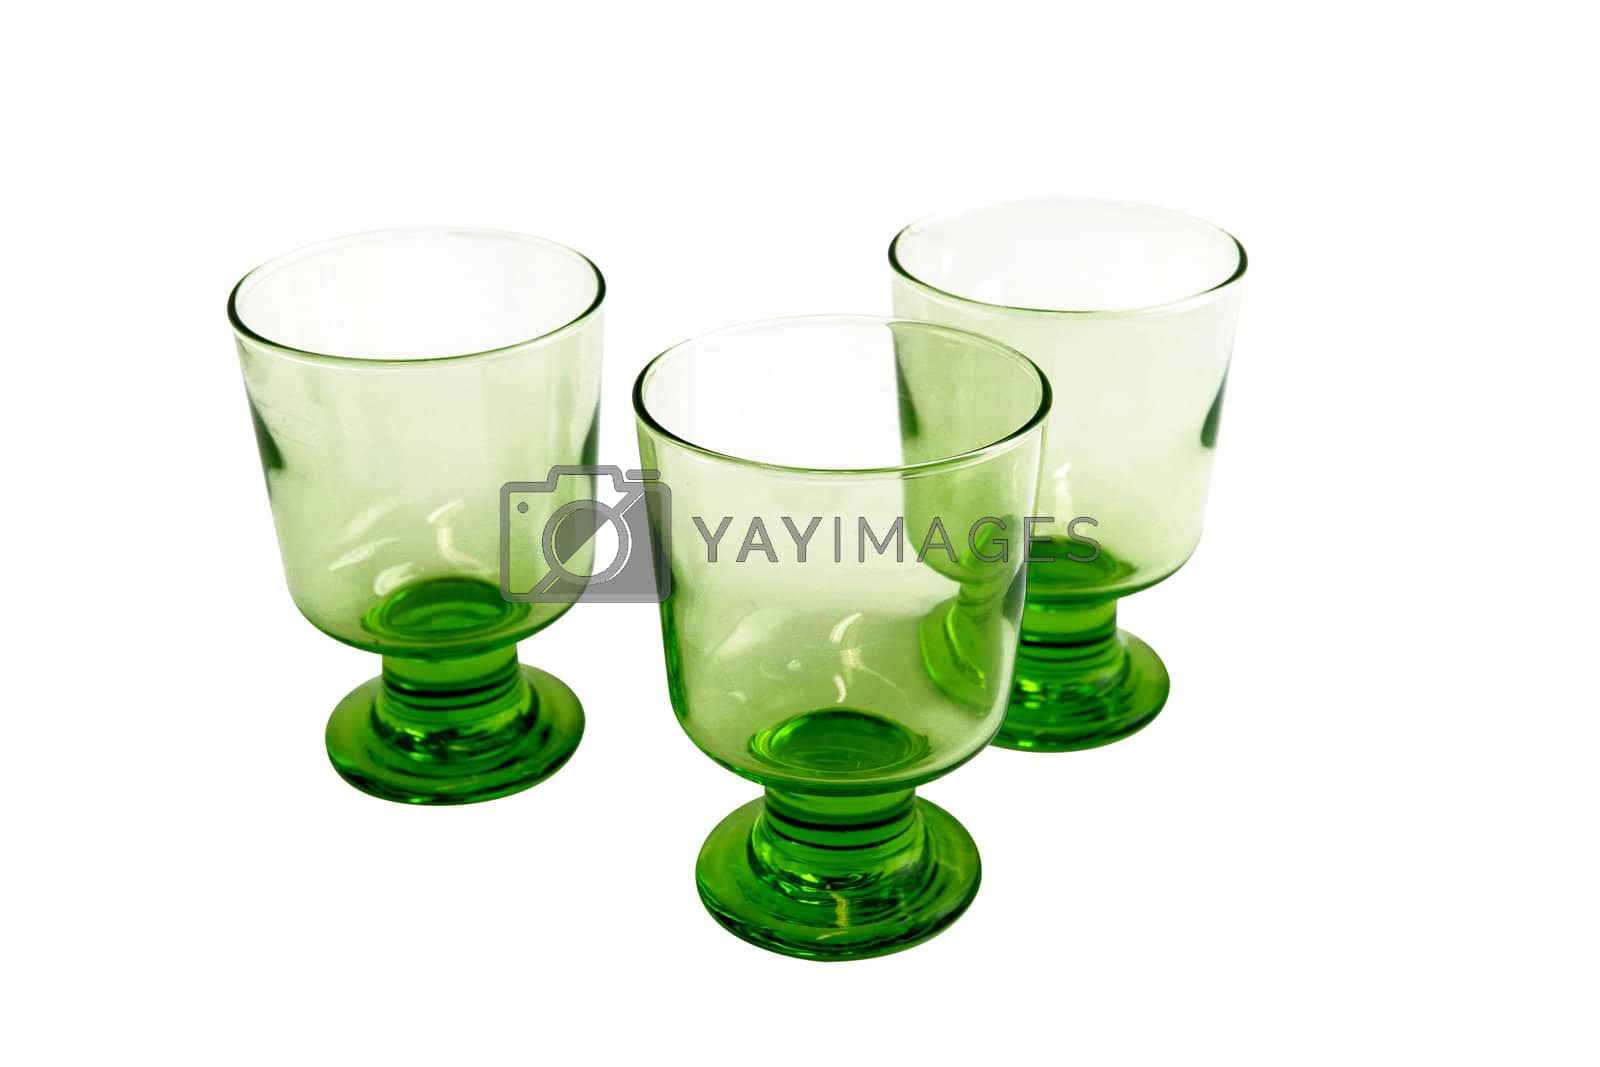 Royalty free image of Three green glasses by phovoir